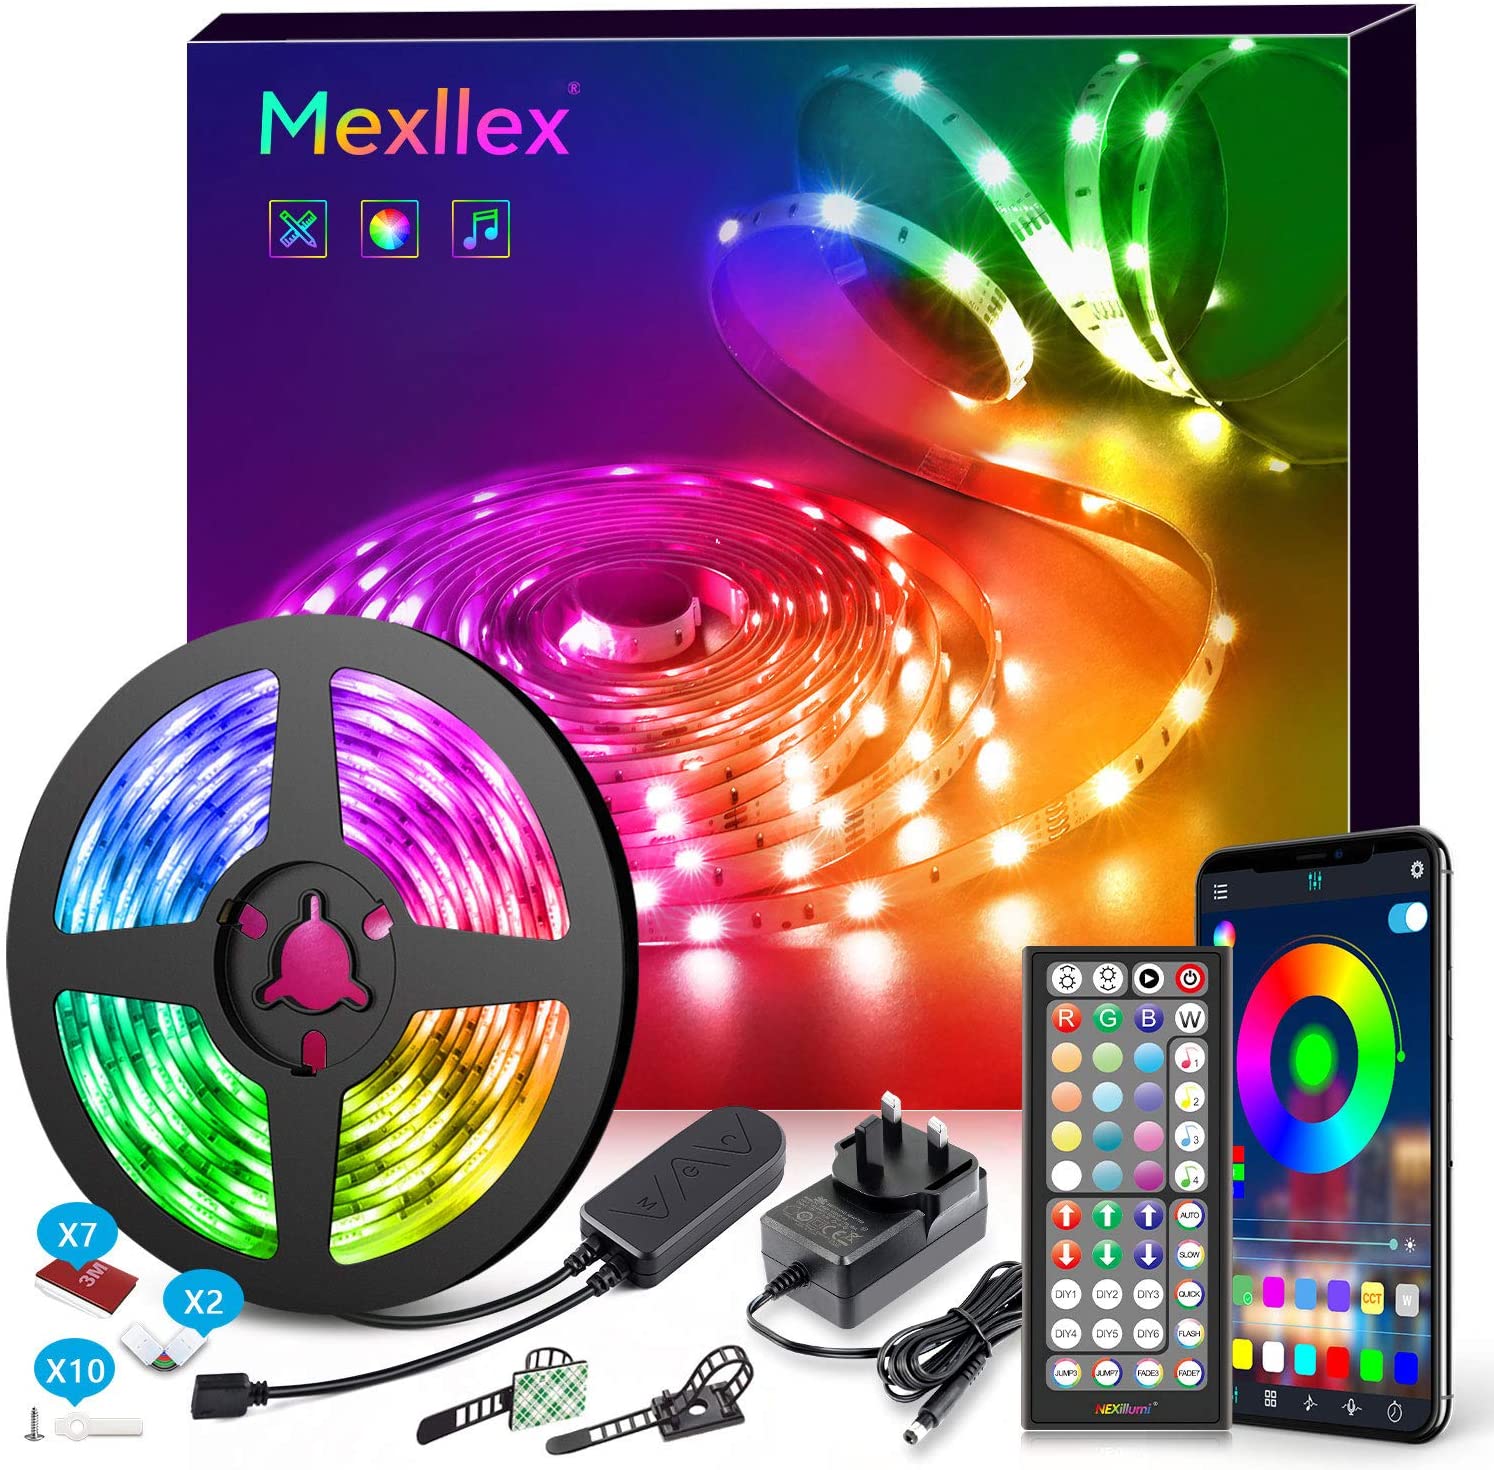 Mexllex LED Strip Light - My Helpful Hints® Product Review